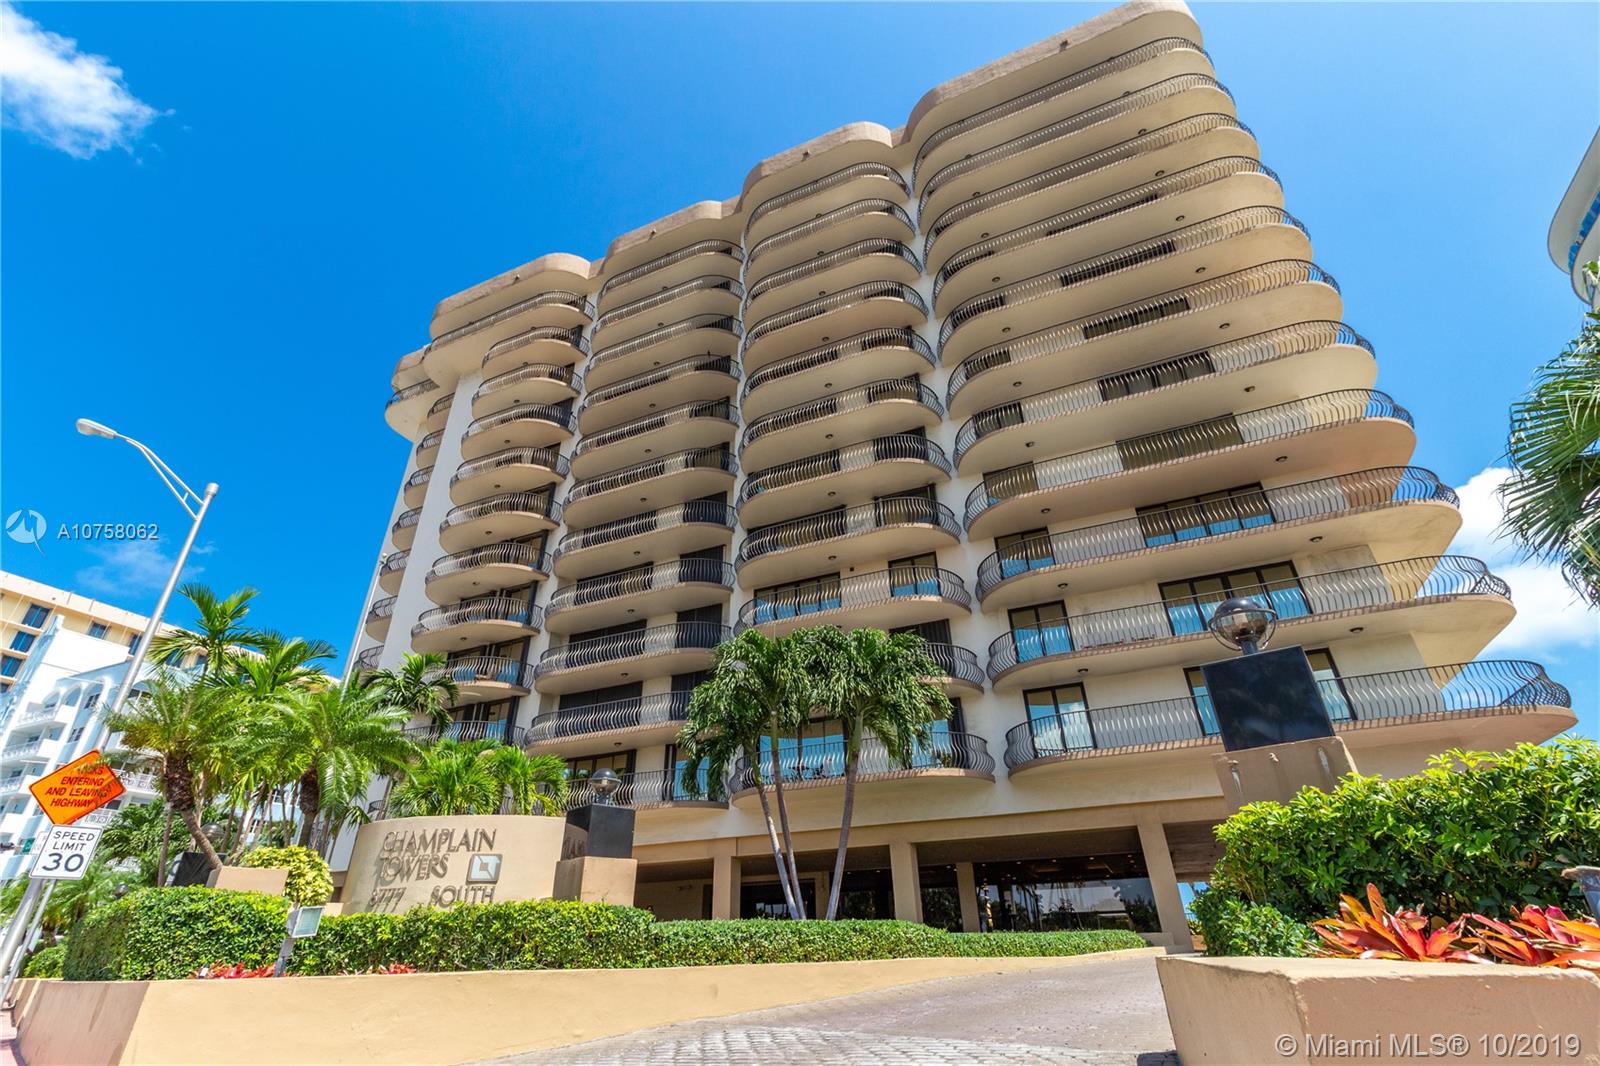 Champlain Tower South Unit #202 Condo for Sale in Surfside ...